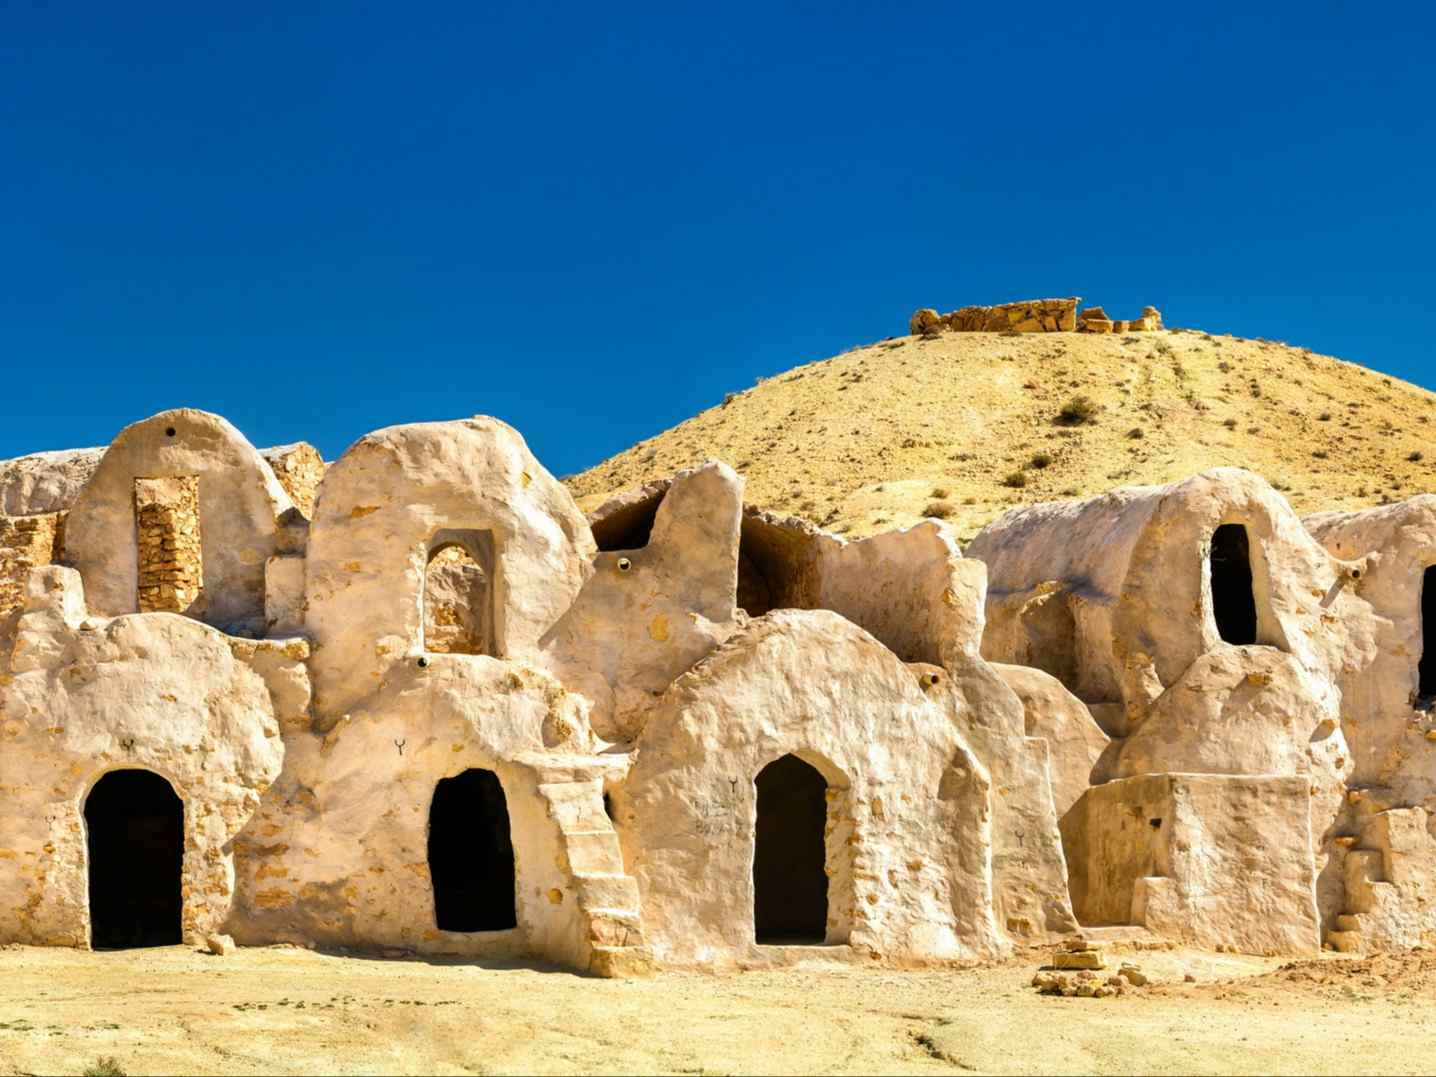 Ksar Hallouf, a fortified village in the Medenine Governorate, Southern Tunisia.